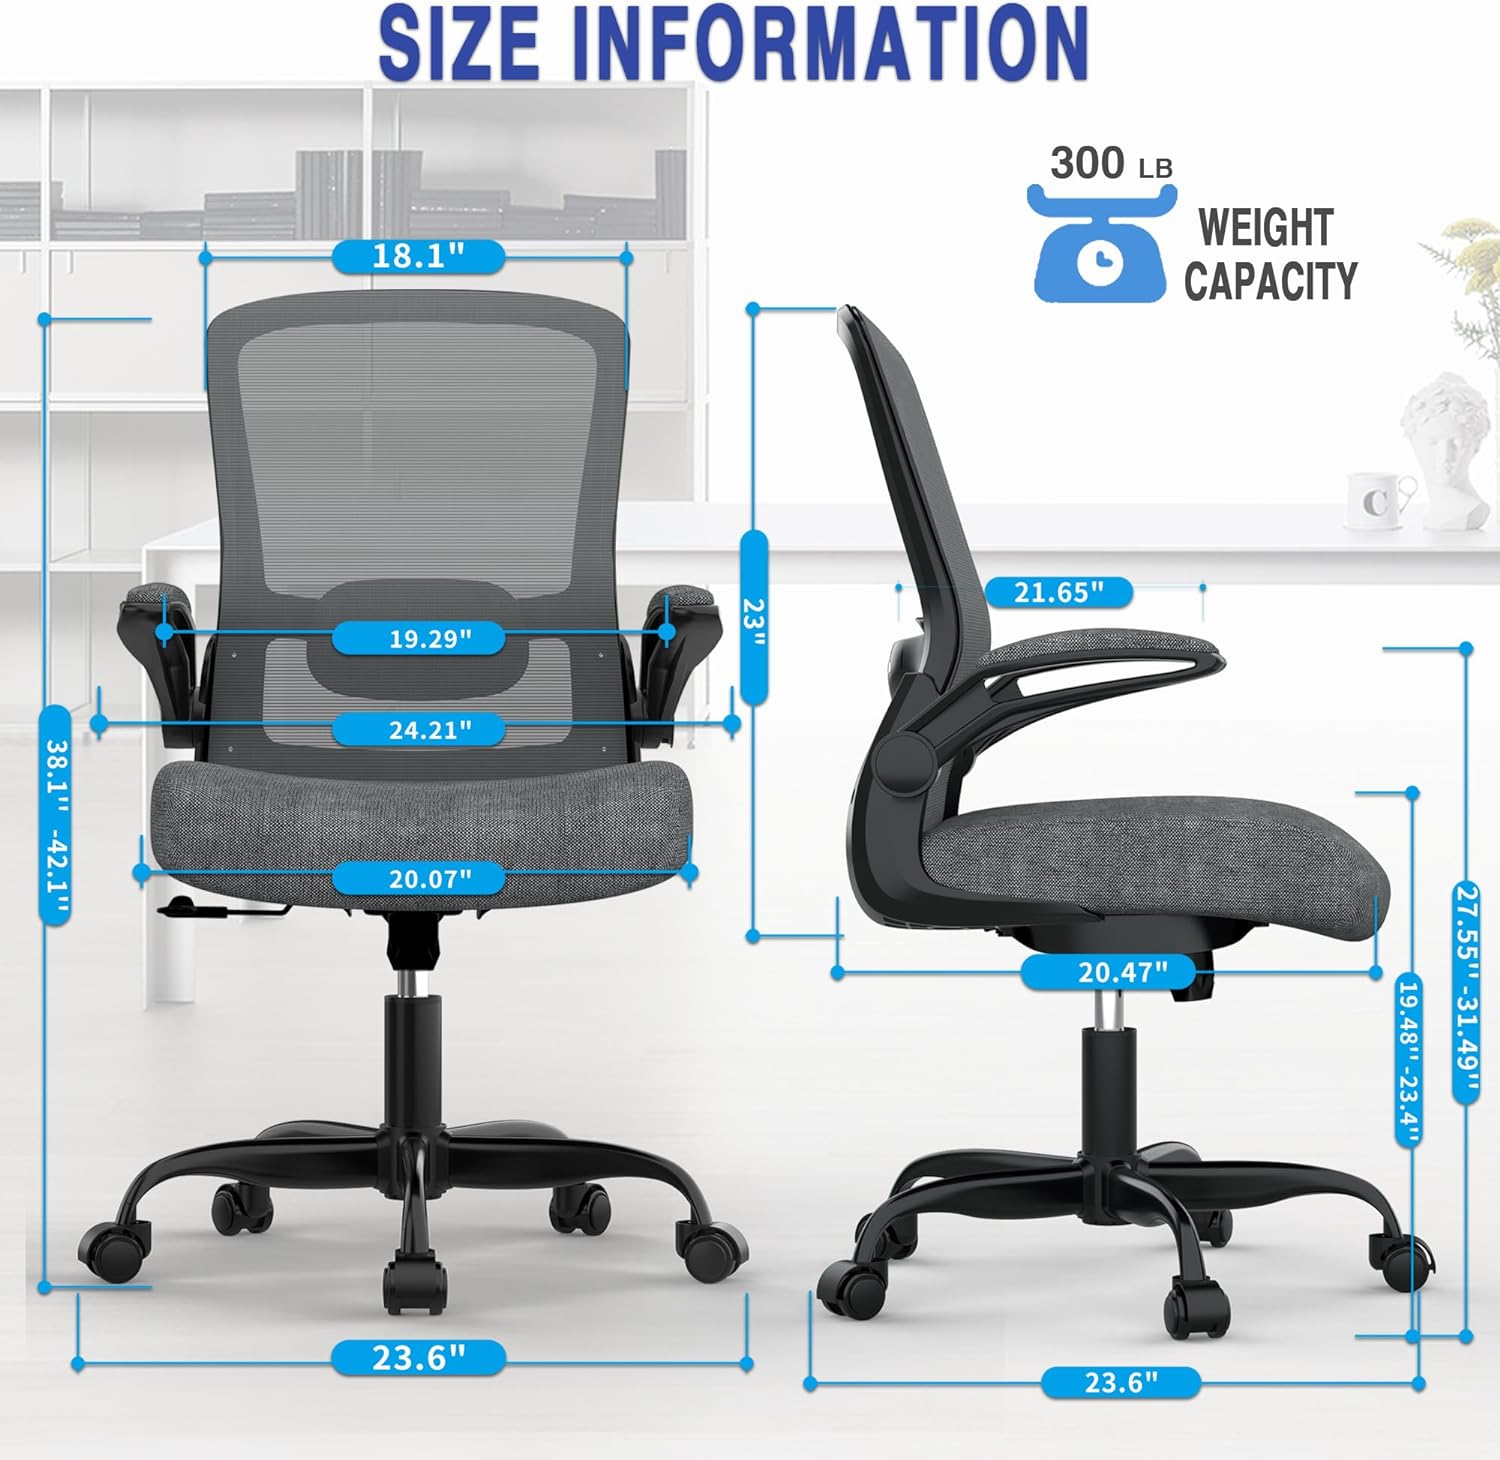 Office Chair, Ergonomic Desk Chair with Adjustable Lumbar Support, High Back